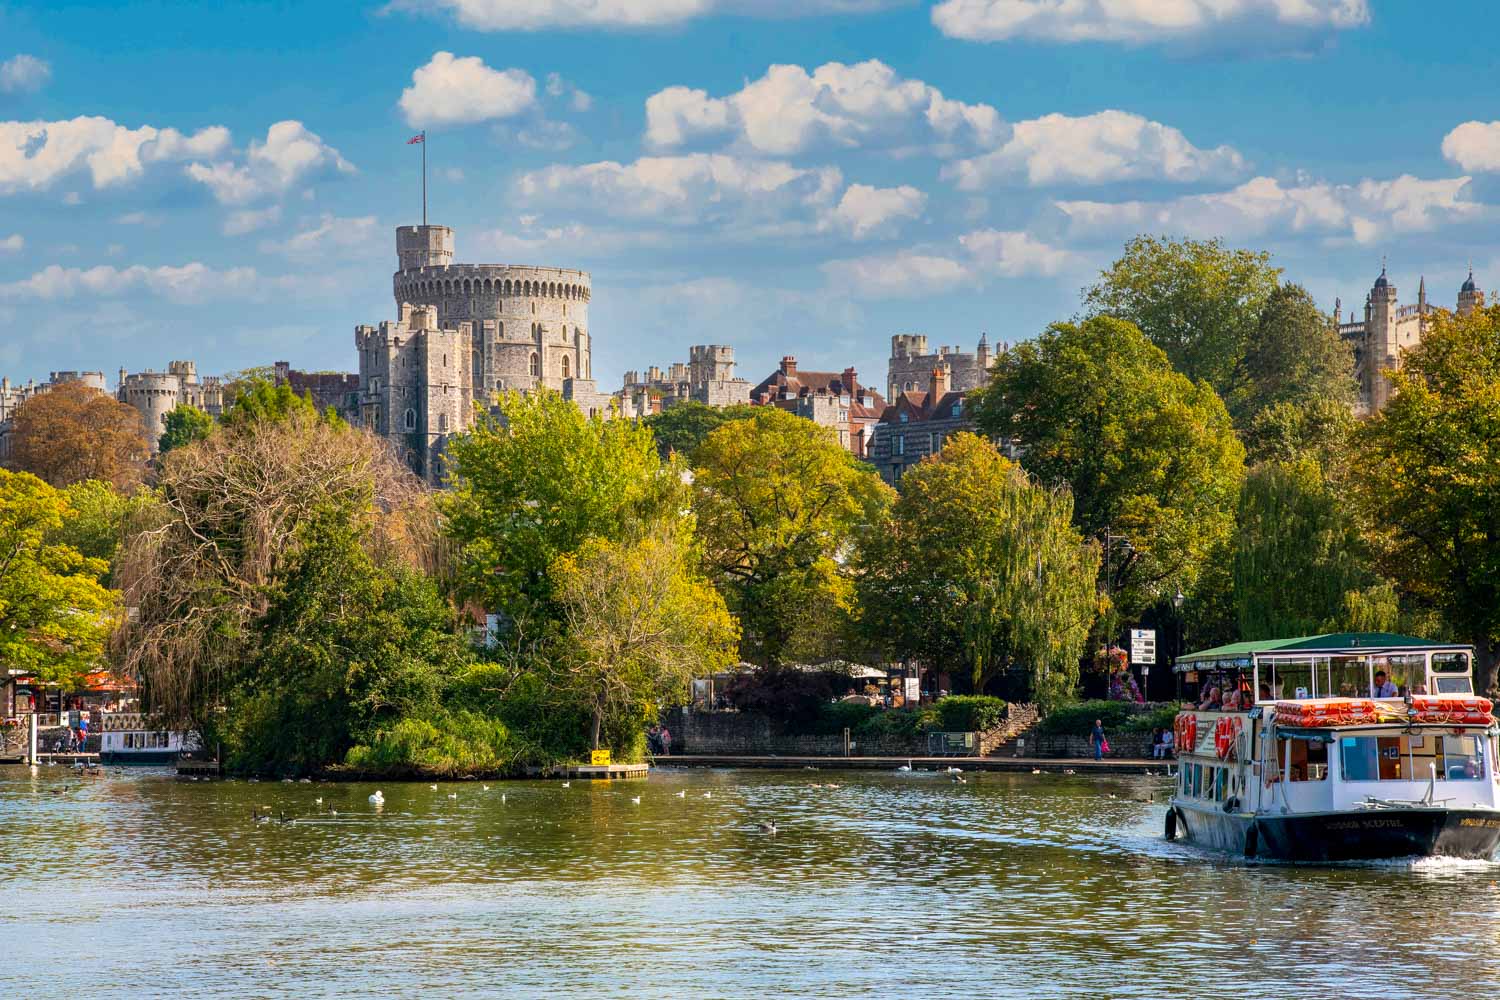 View across the river to Windsor Castle as a boat cruises along the water - my pick of the best things to do in Windsor, one of the best days out from London with kids